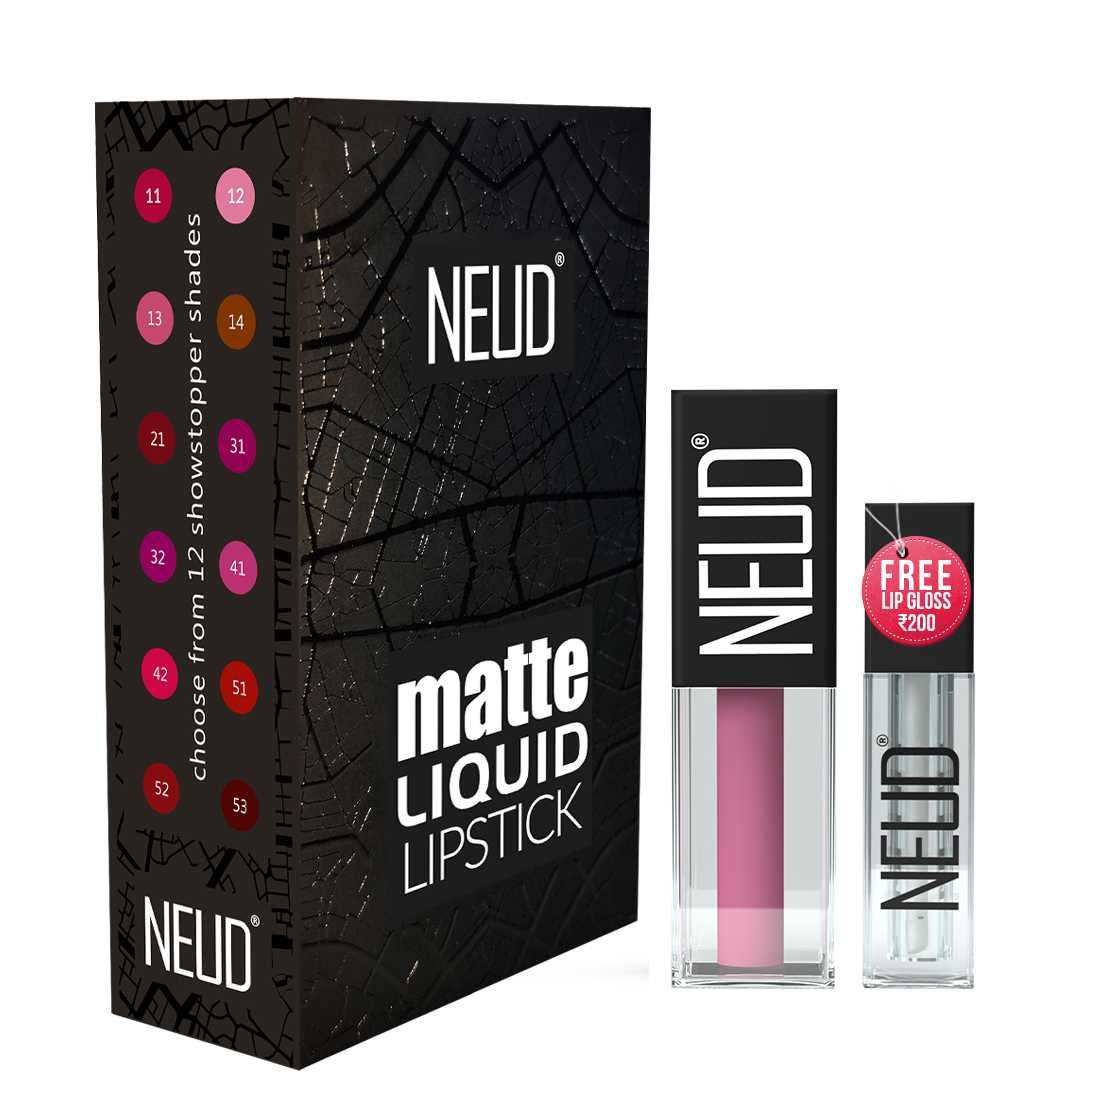 NEUD Matte Liquid Lipstick Supple Candy with Jojoba Oil, Vitamin E and Almond Oil - Smudge Proof 12-hour Stay Formula with Free Lip Gloss